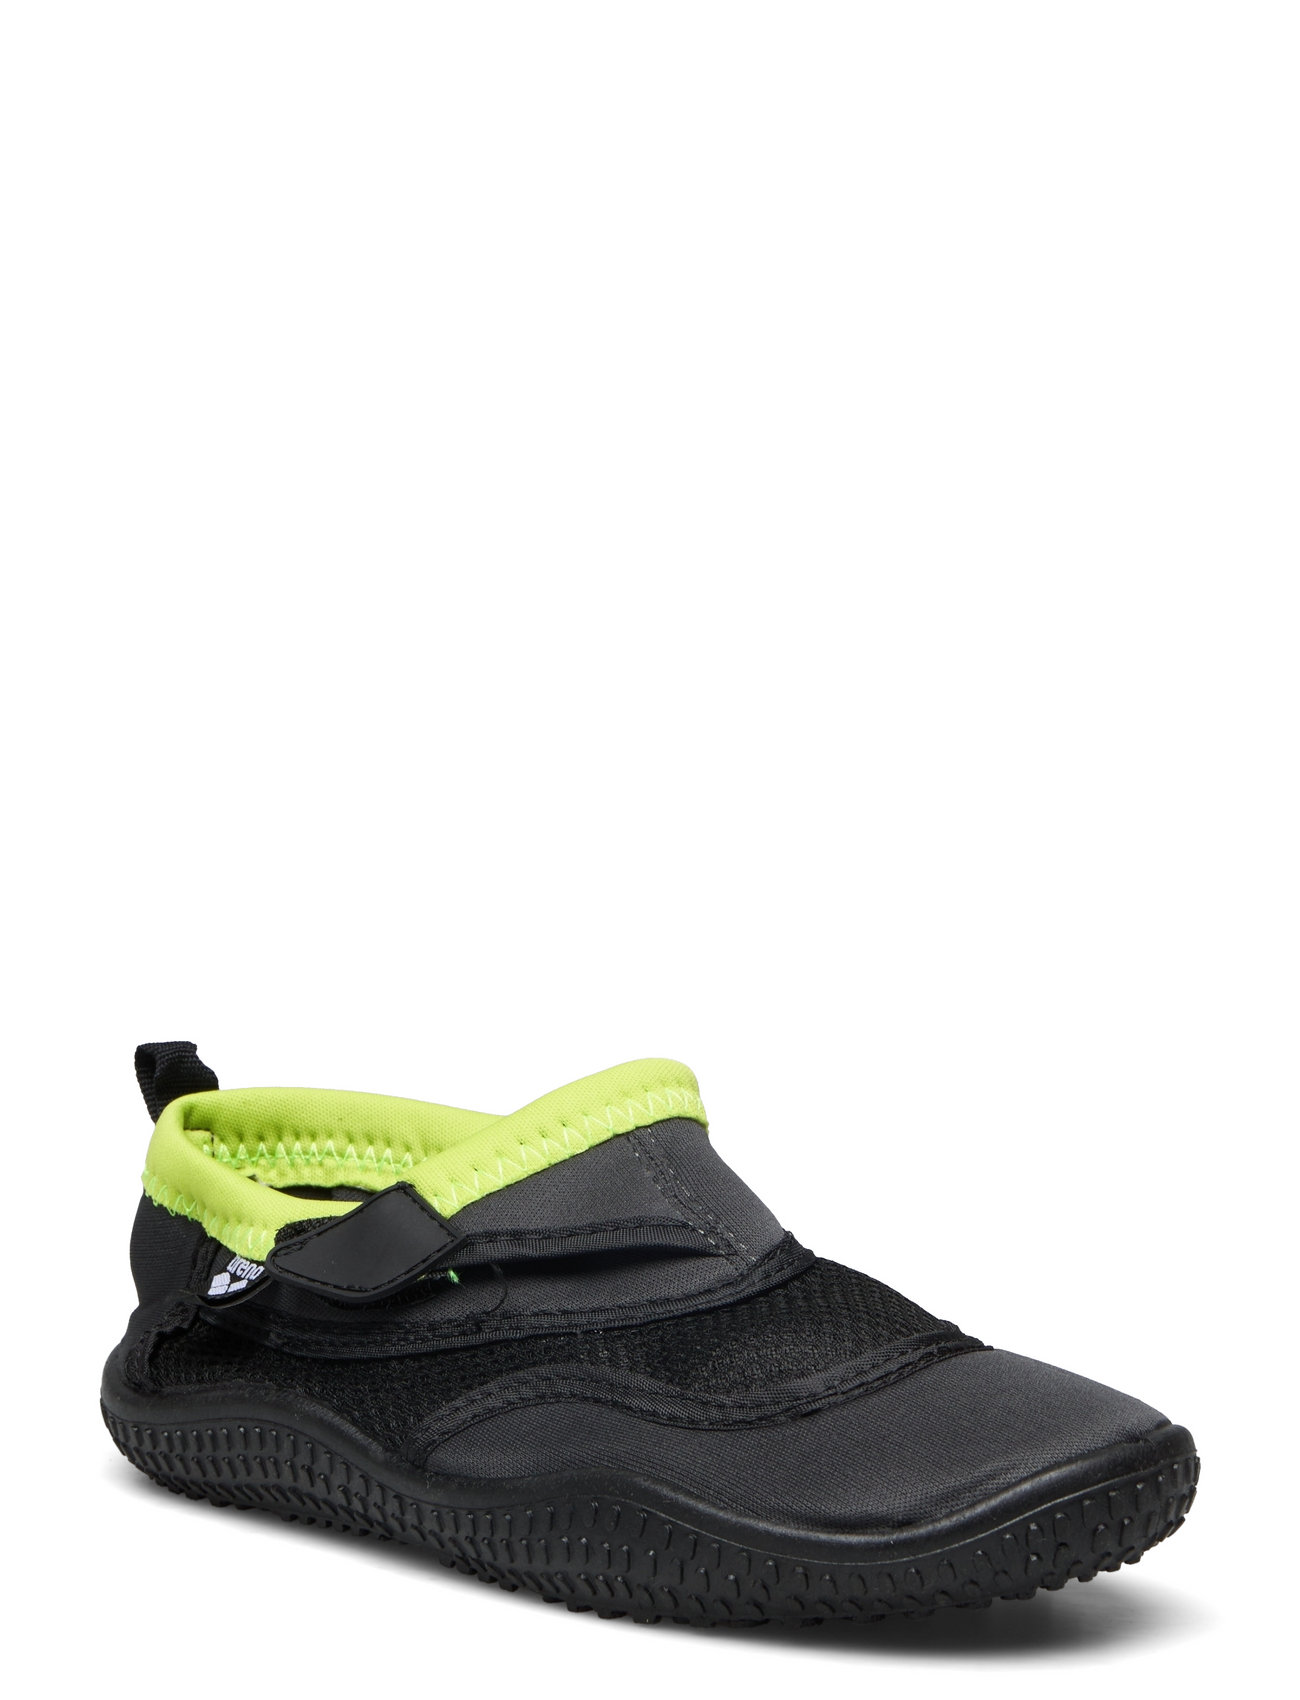 Arena Watershoes Jr Sport Summer Shoes Water Shoes Grey Arena